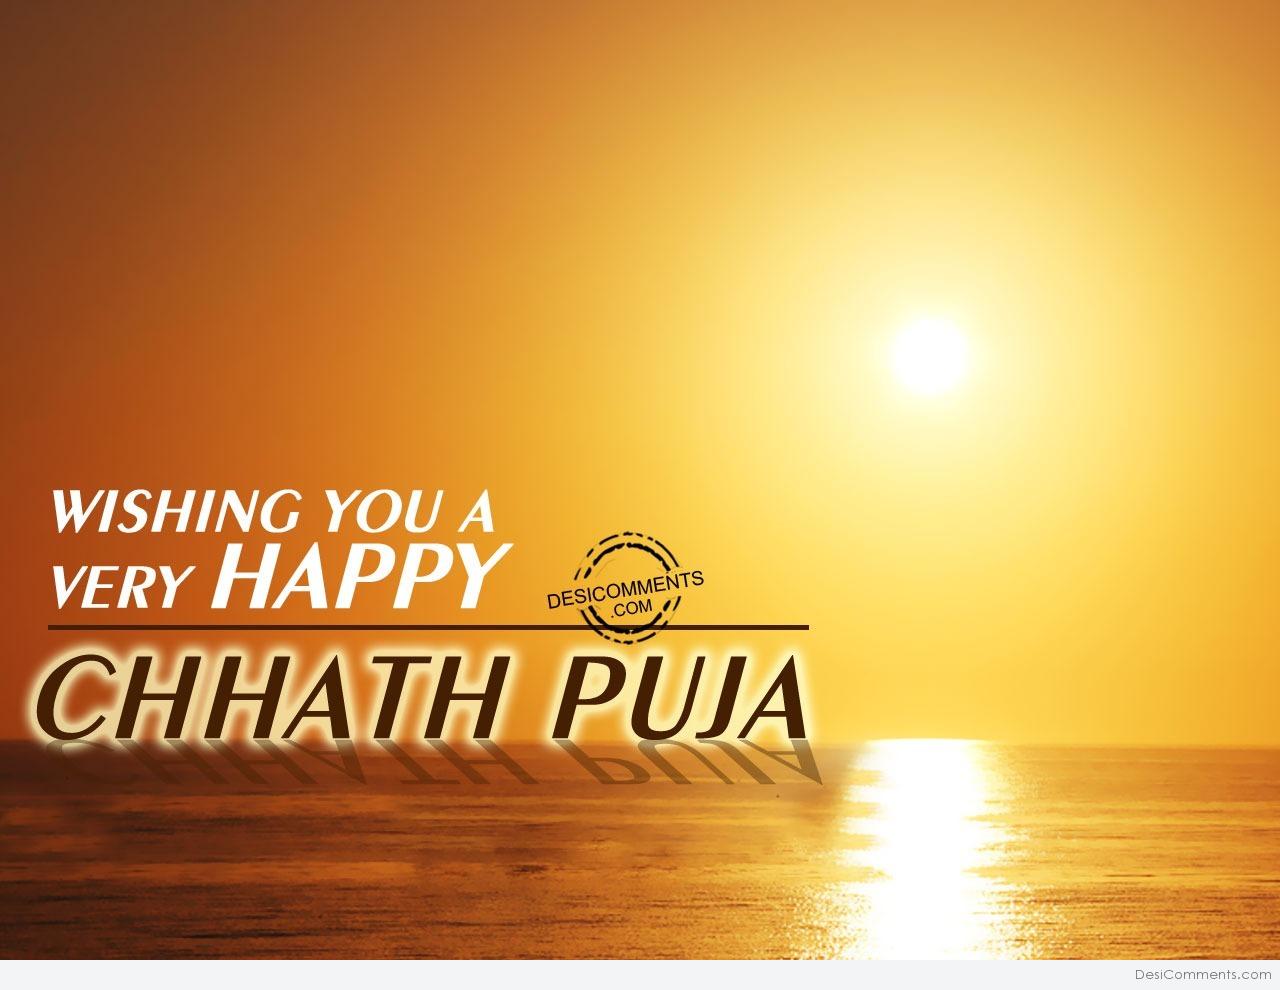 Wishing you Happy Chhath Puja - DesiComments.com